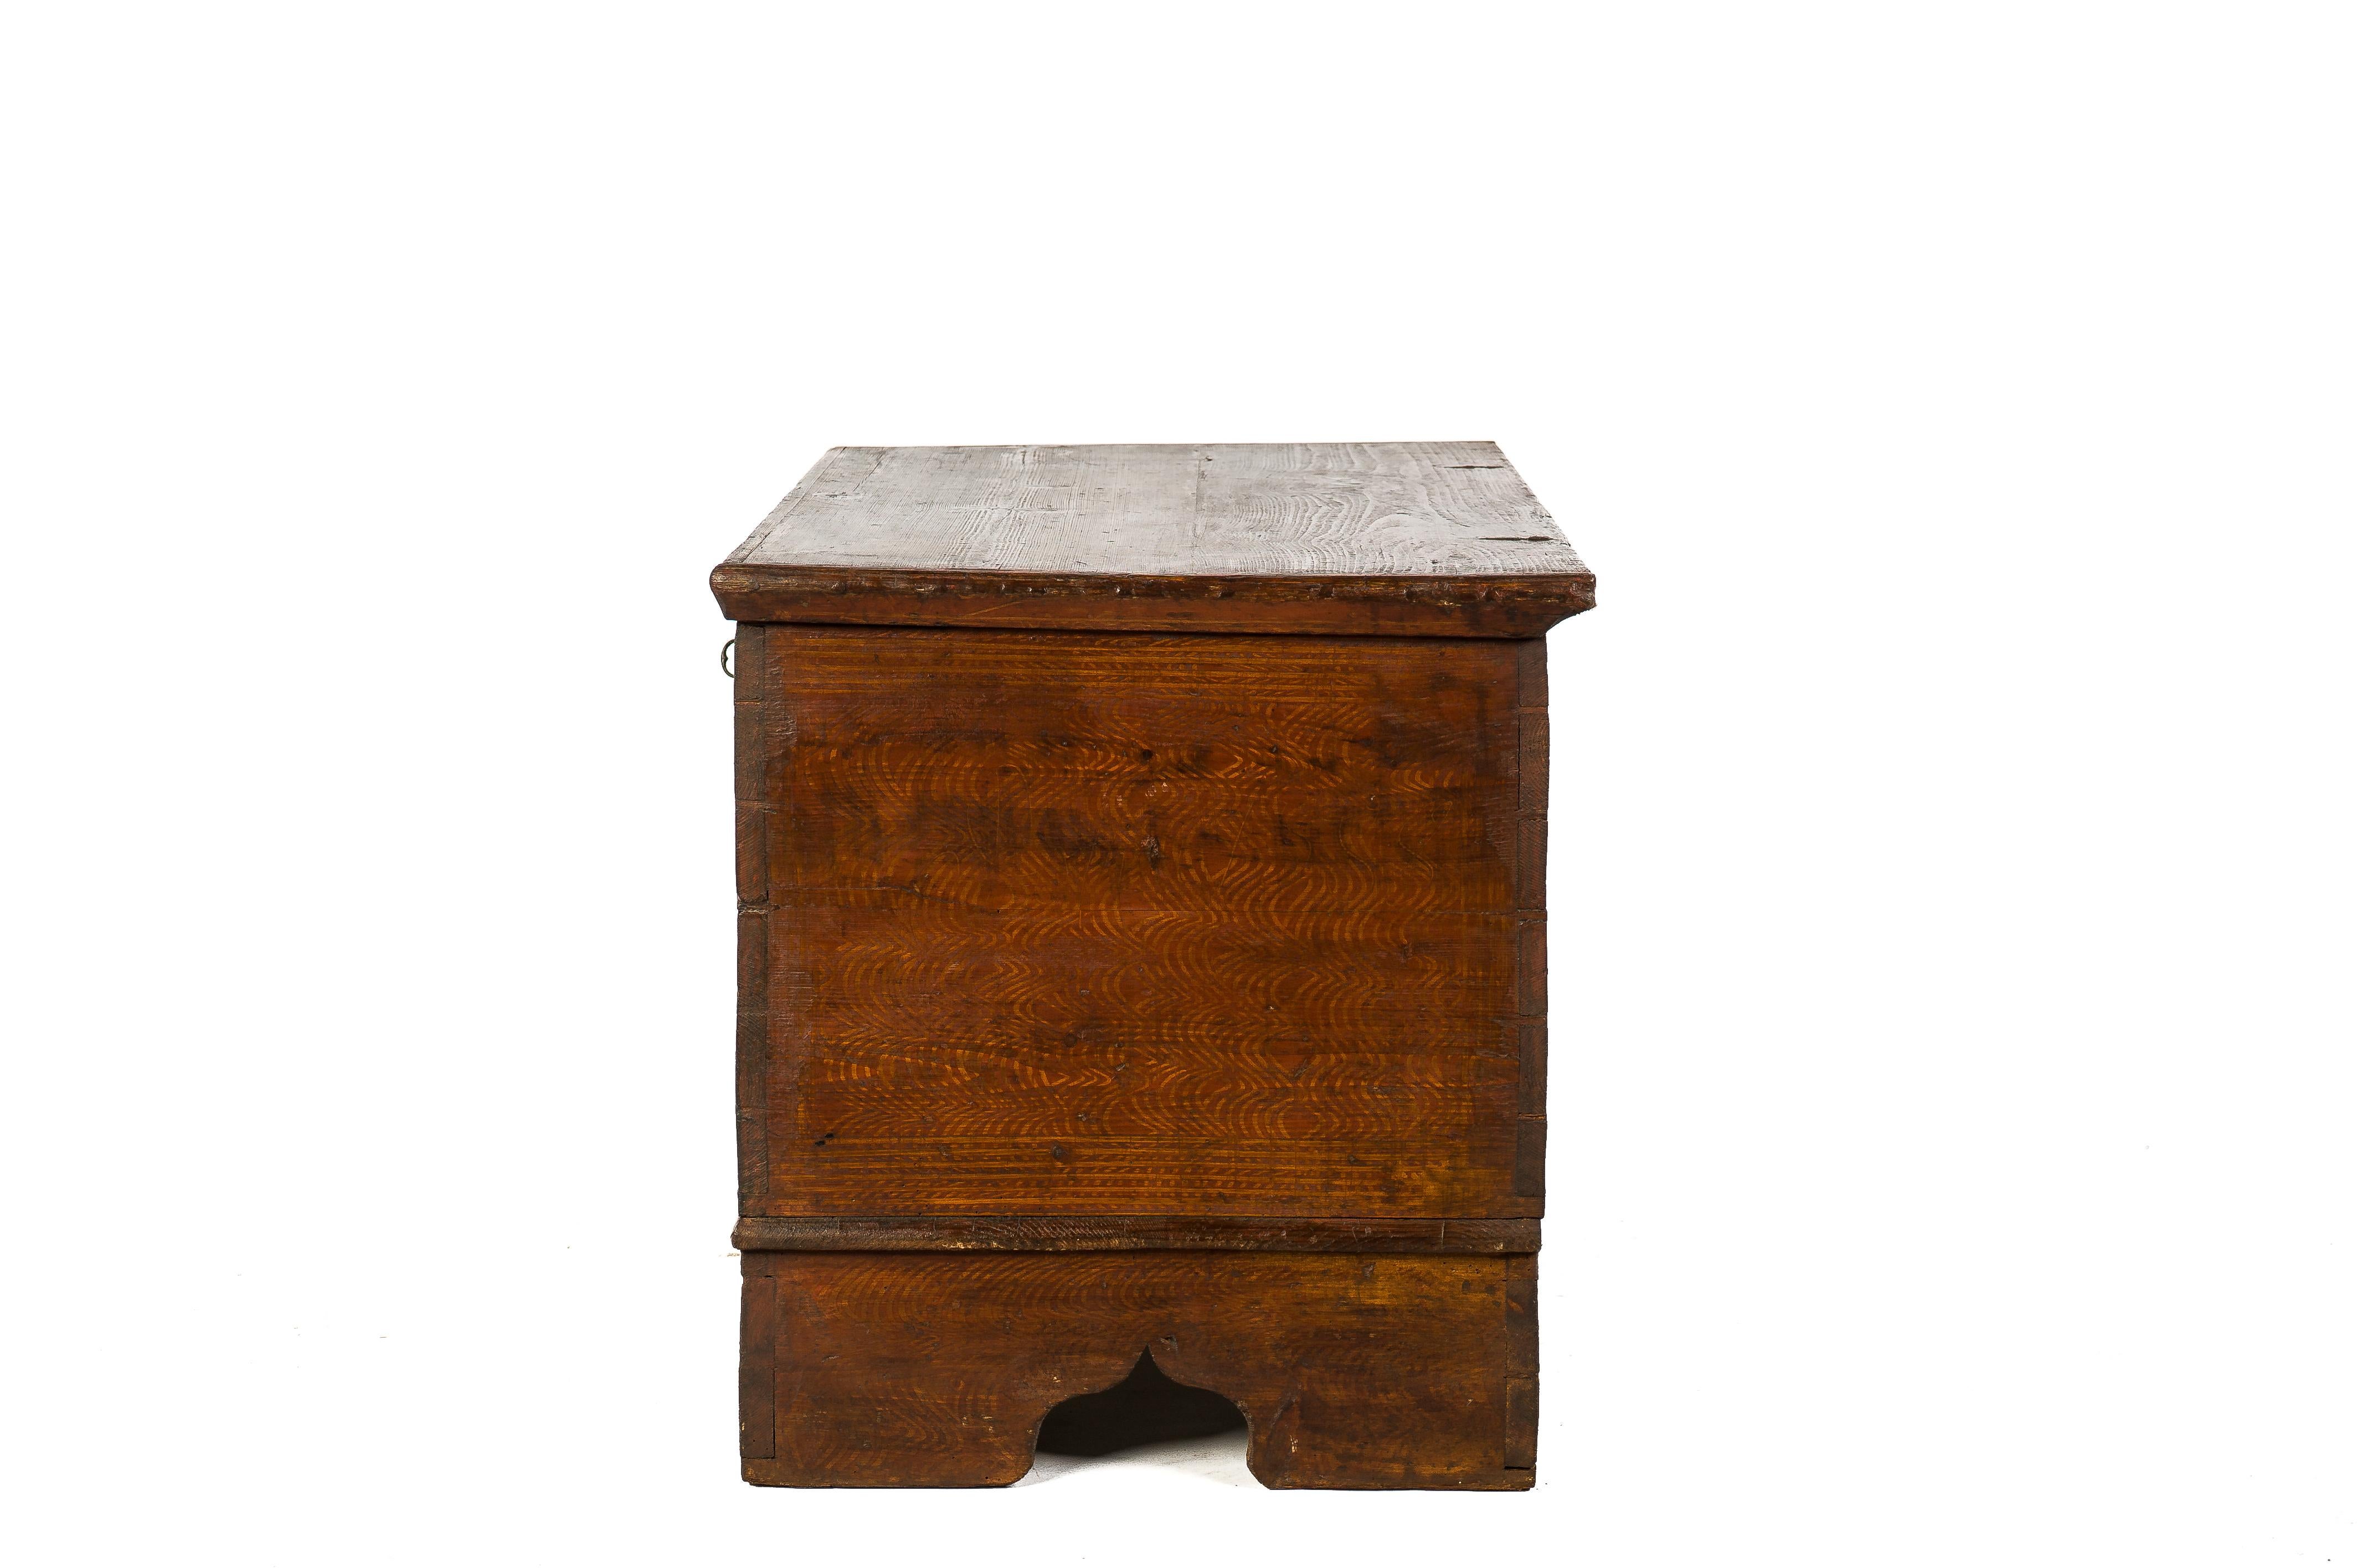 Steel Antique 19th-Century Solid Pine and Traditional Painted Austrian Trunk or Chest For Sale